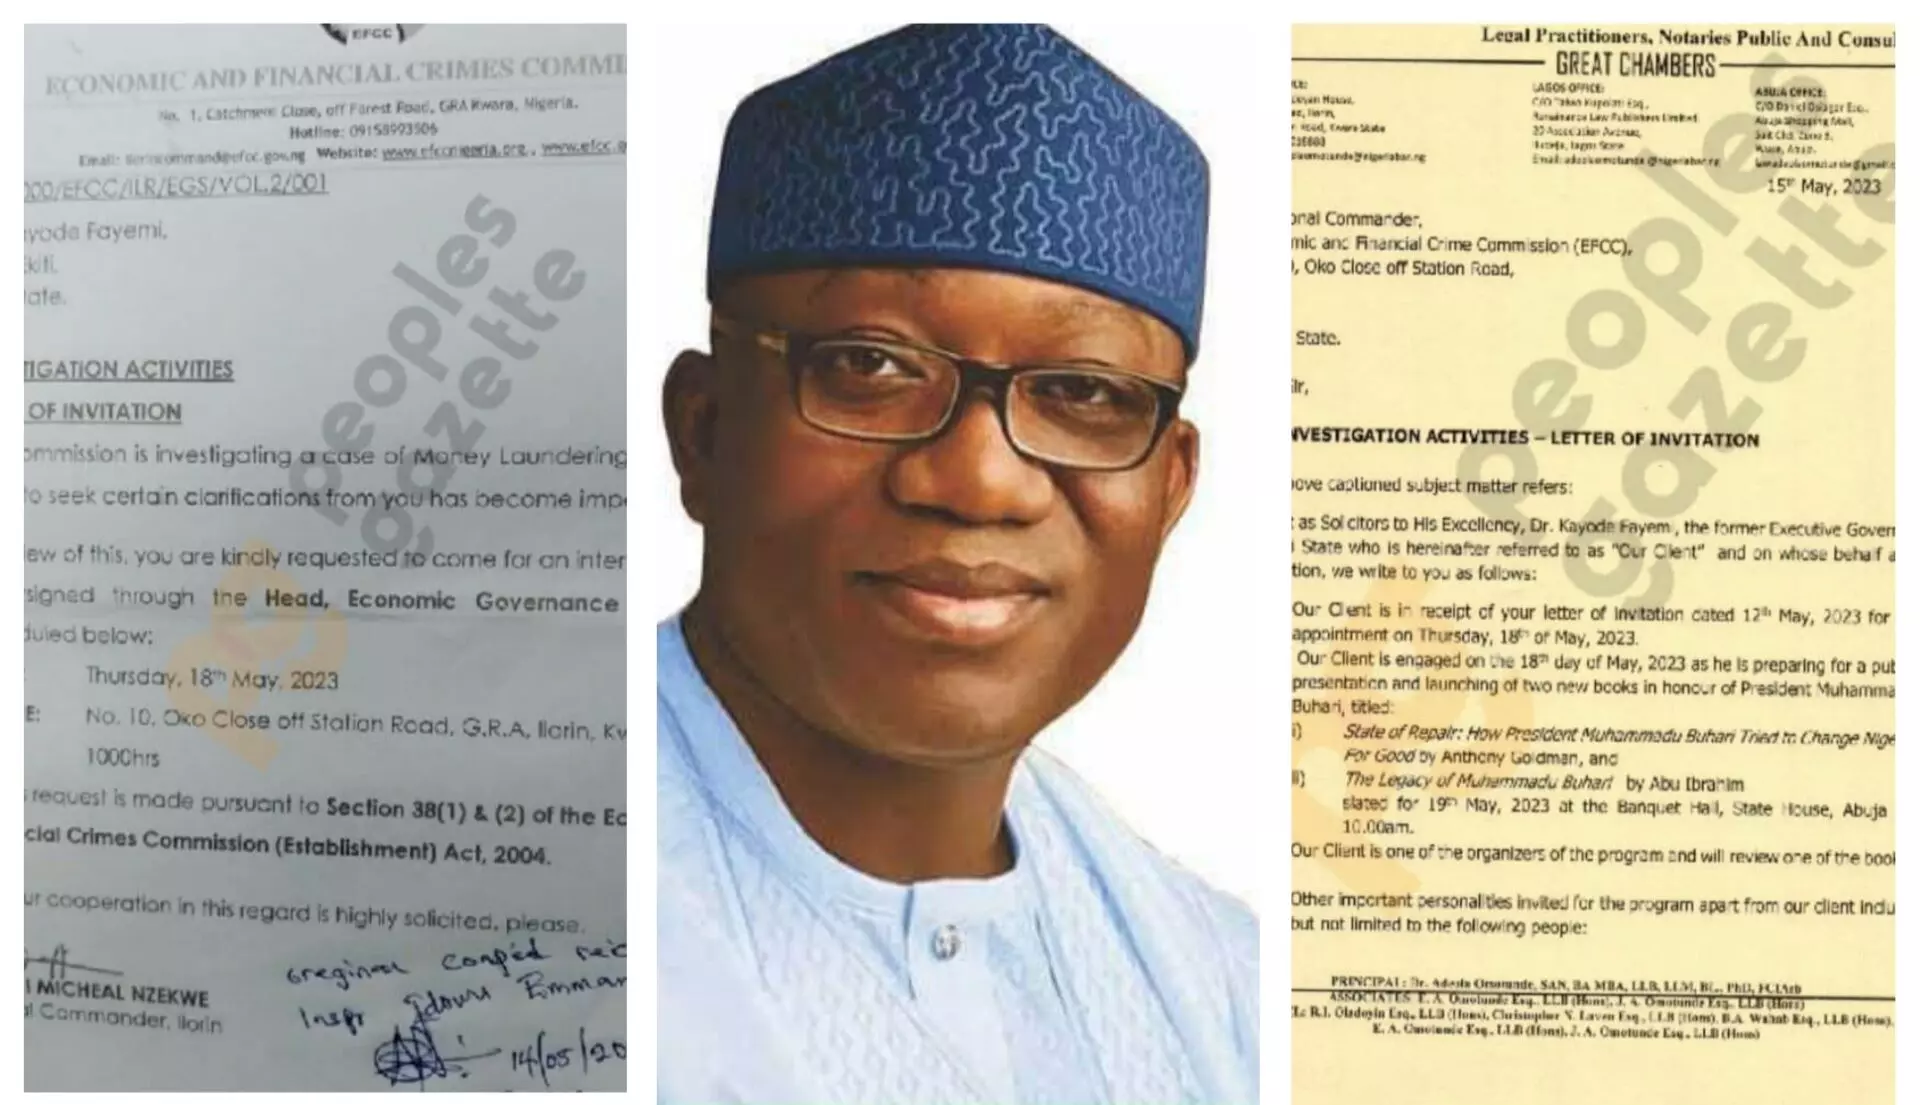 EFCC probes Fayemi over alleged N4bn fraud, money laundering